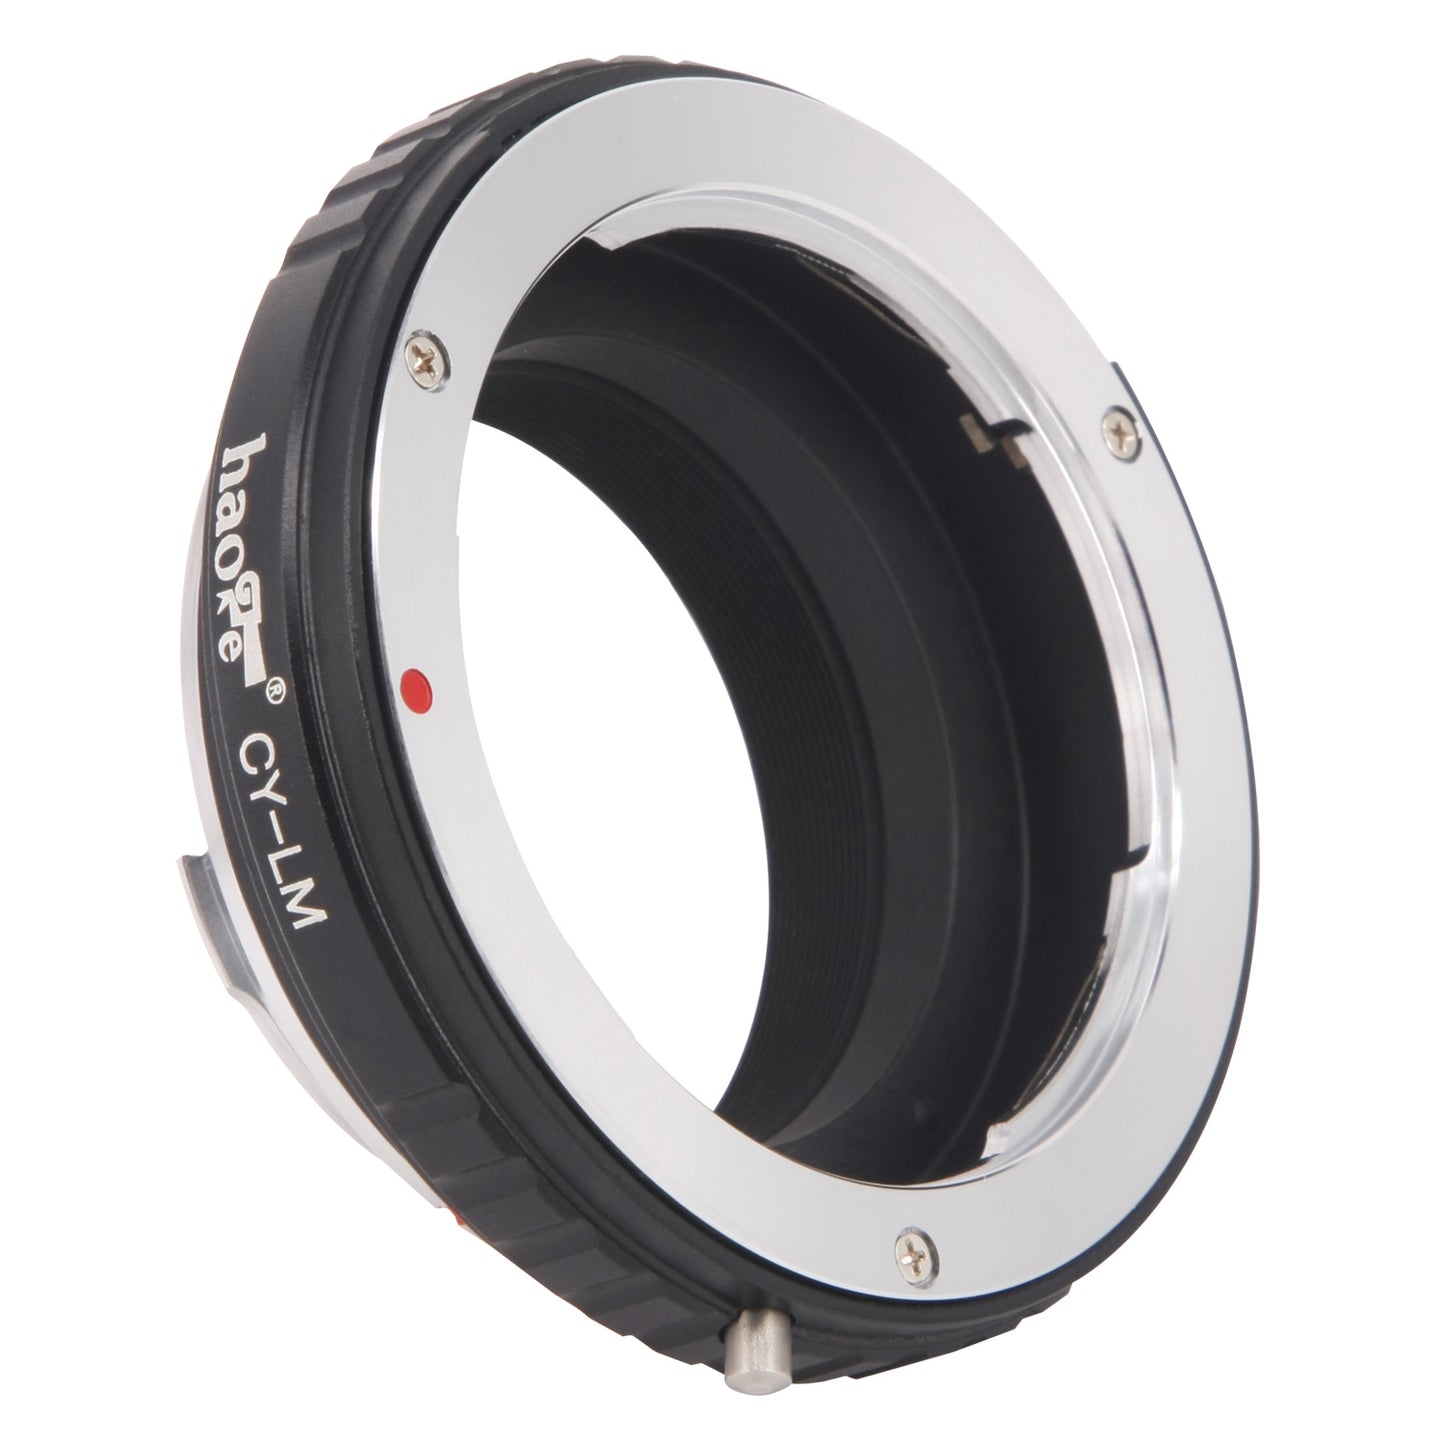 Haoge Lens Mount Adapter for Contax / Yashica C/Y CY Lens to Leica M-mount Camera such as M240, M240P, M262, M3, M2, M1, M4, M5, CL, M6, MP, M7, M8, M9, M9-P, M Monochrom, M-E, M, M-P, M10, M-A